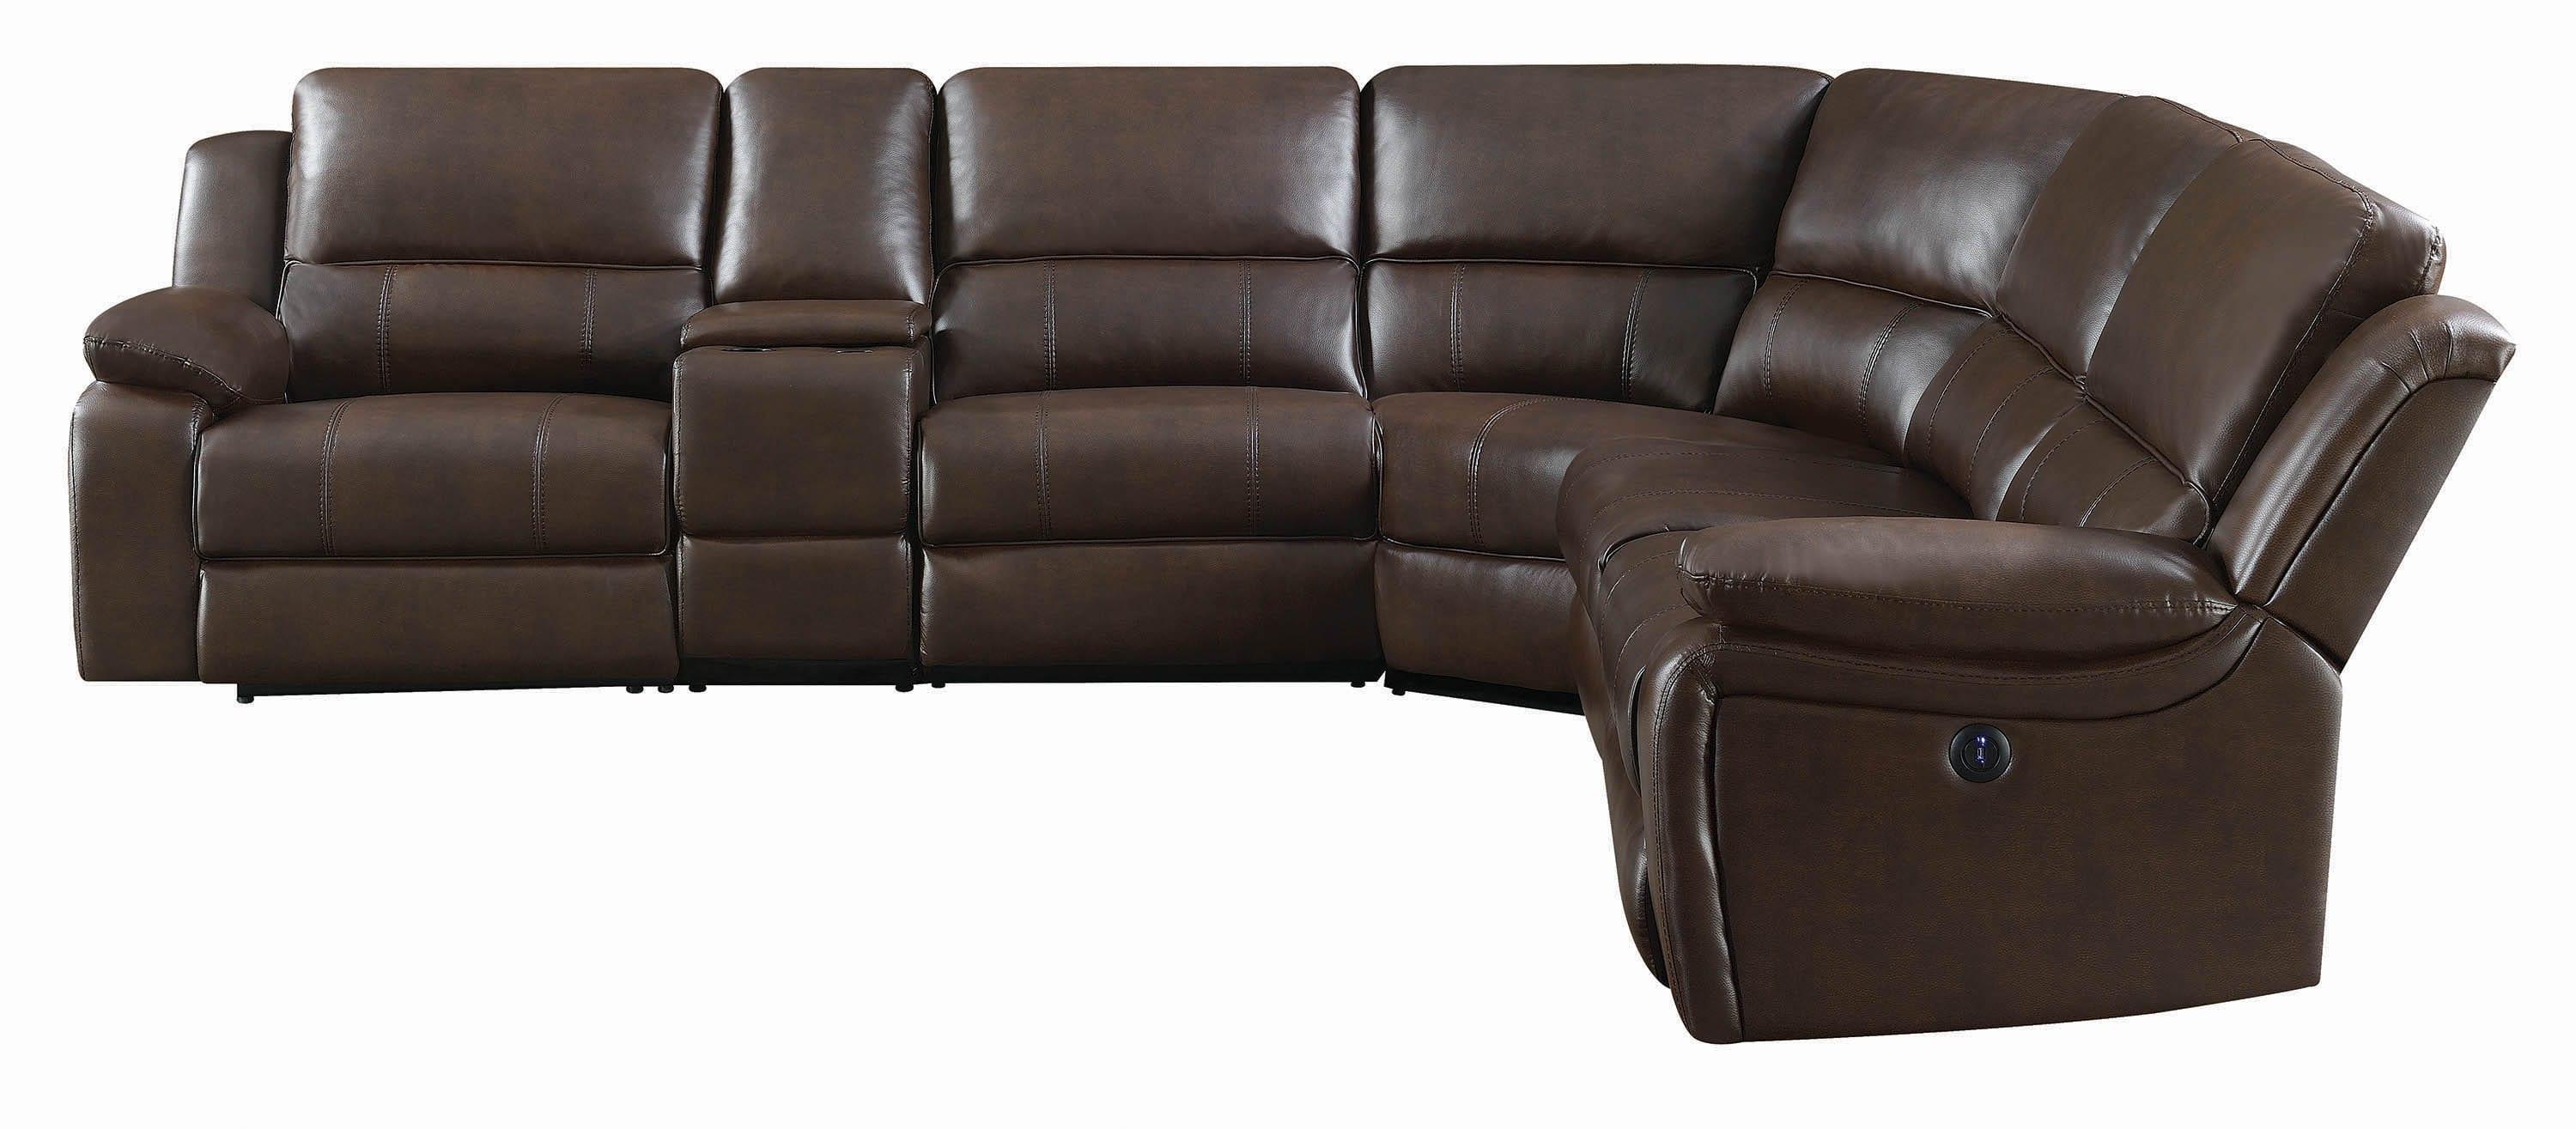 

    
650180 Contemporary Brown Faux Leather Upholstery power sectional Channing Coaster
